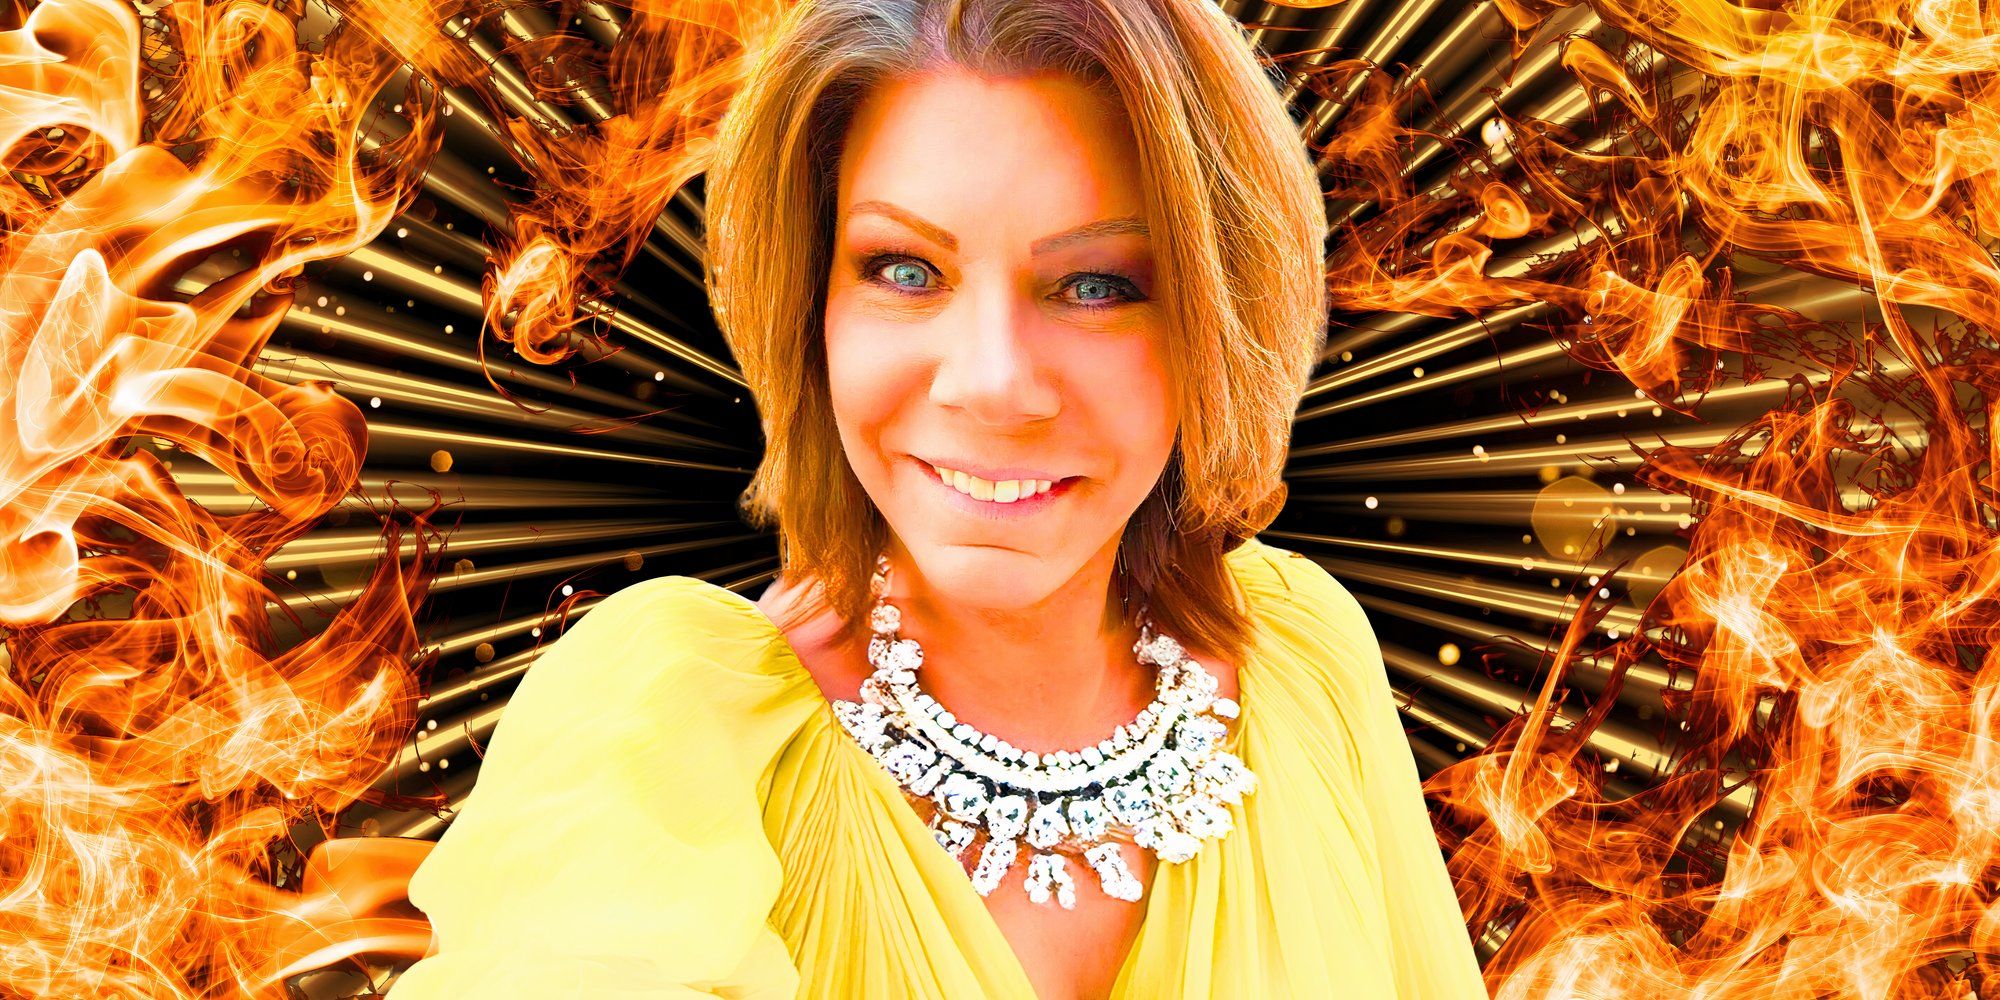 Sister Wives' Meri in yellow wearing diamond necklace with fire background